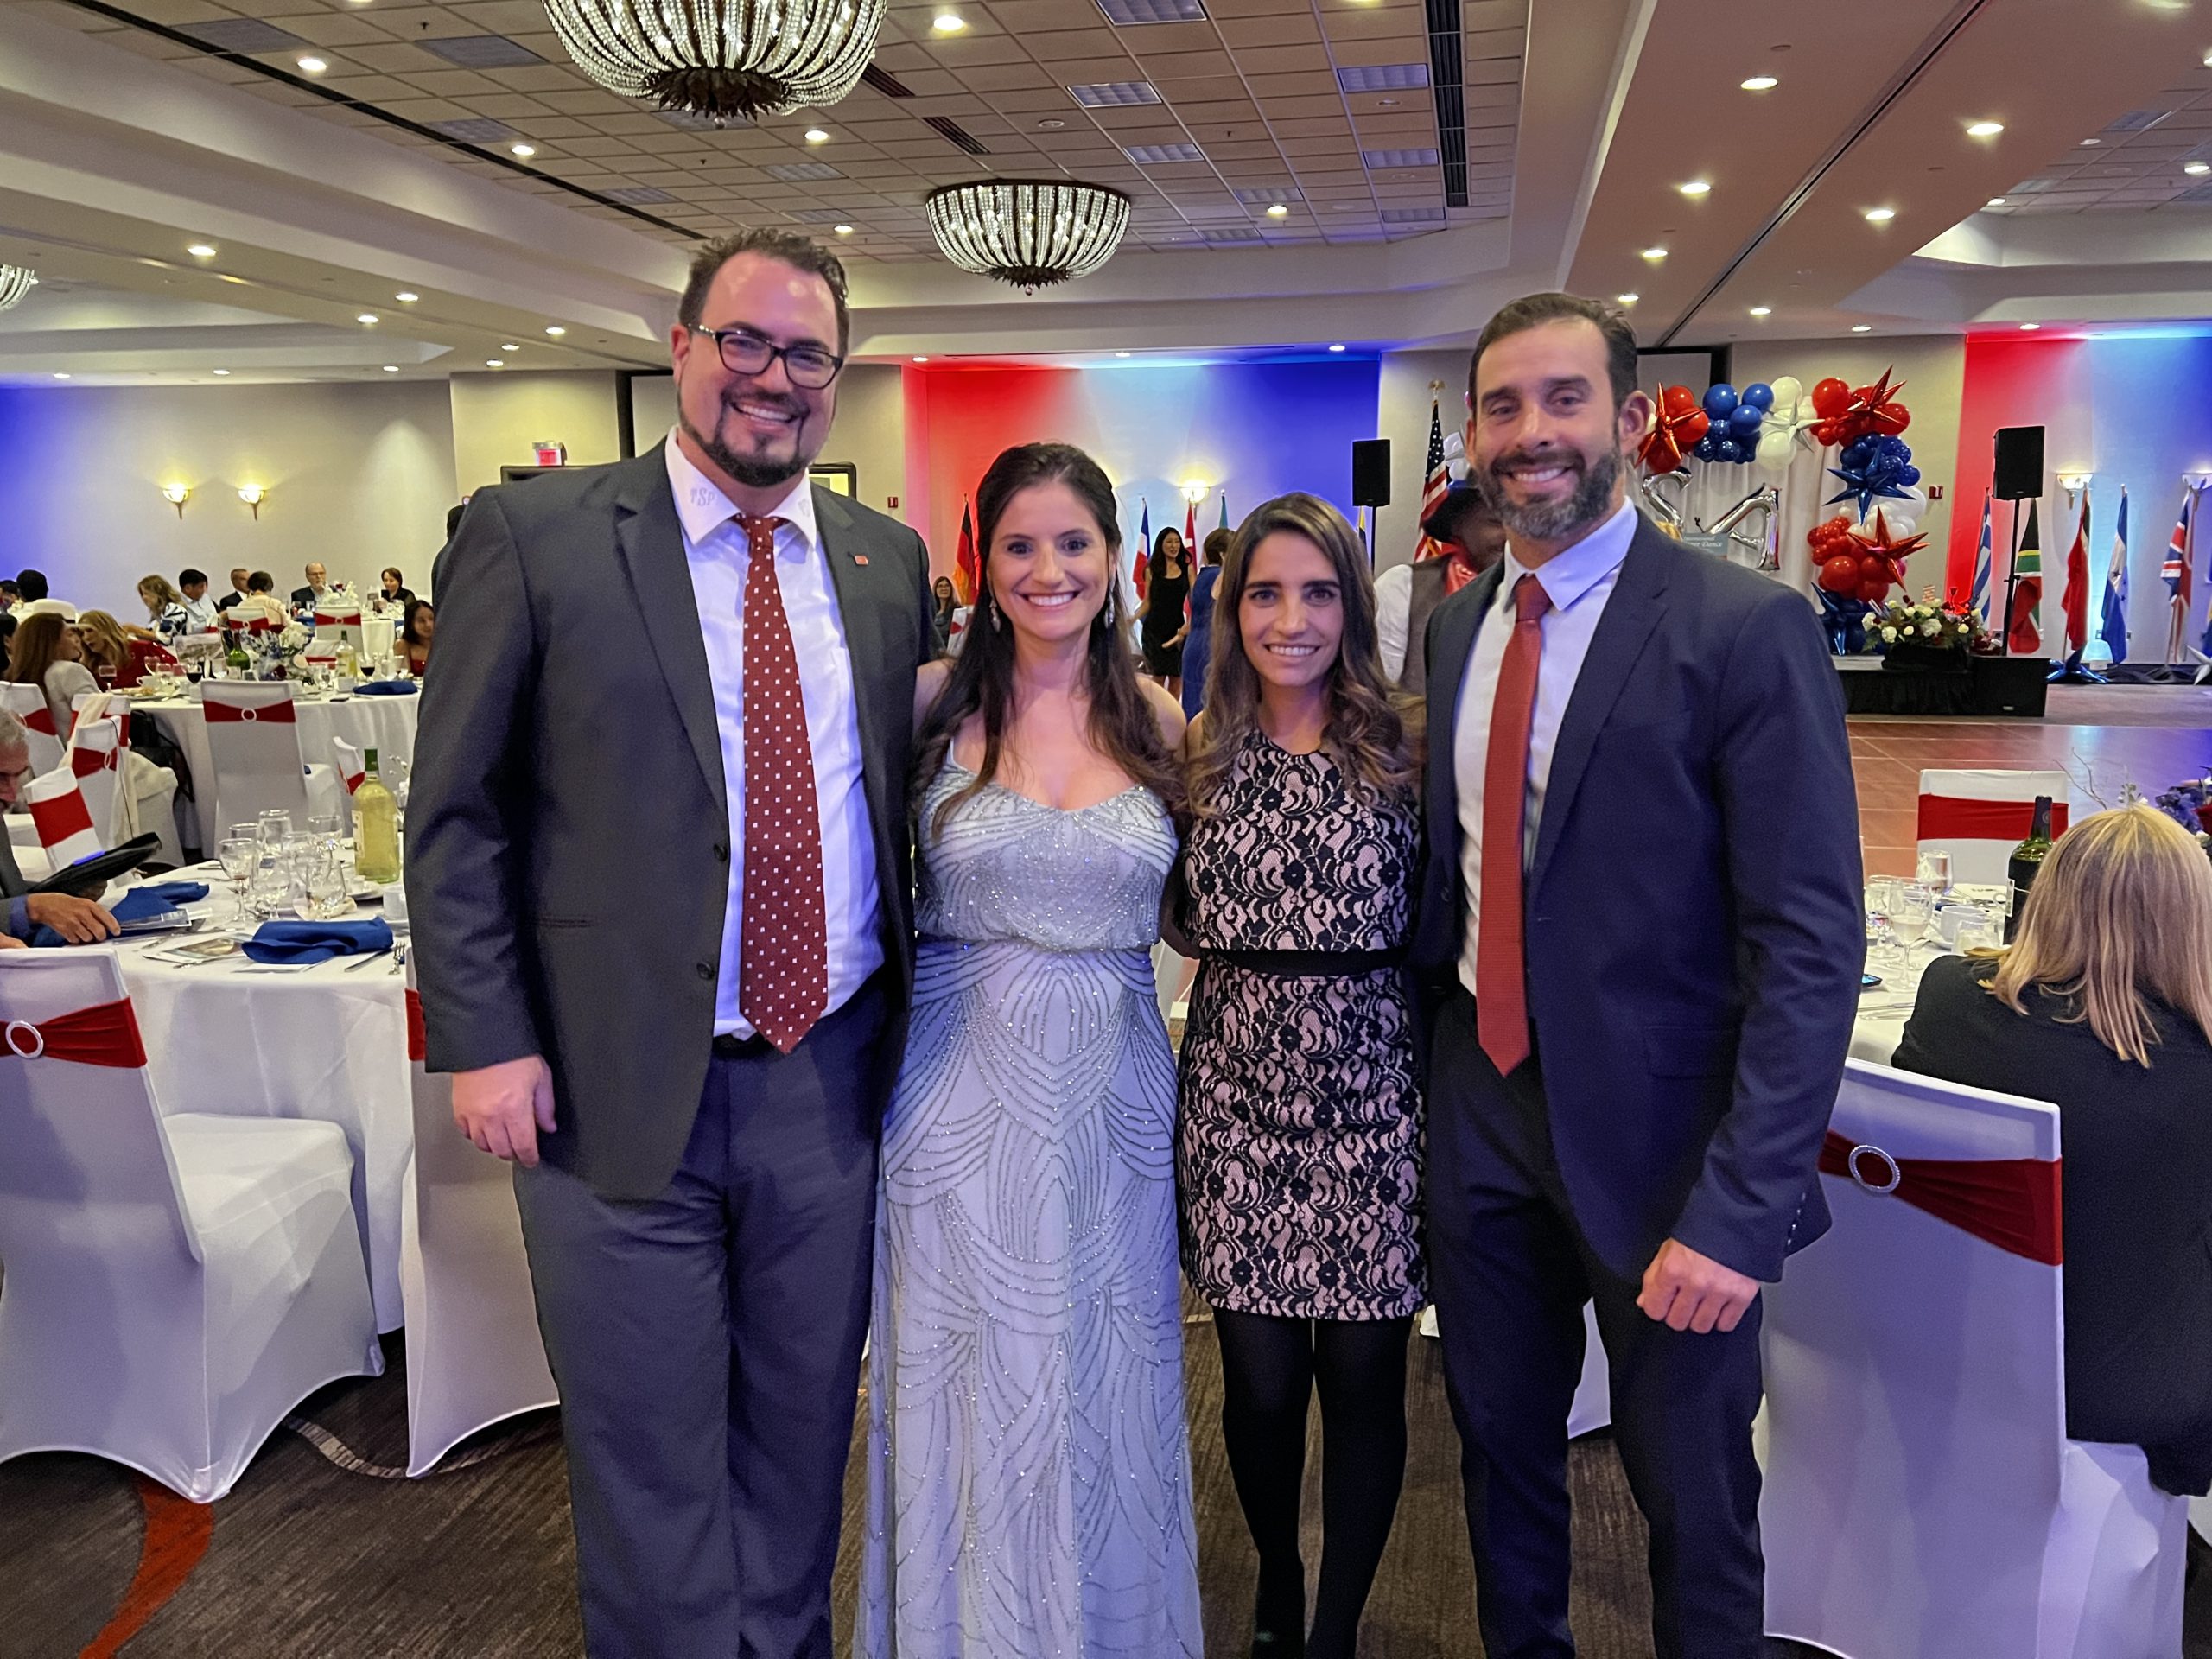 Sold-Out Coral Springs International Dinner Dance Celebrates the USA